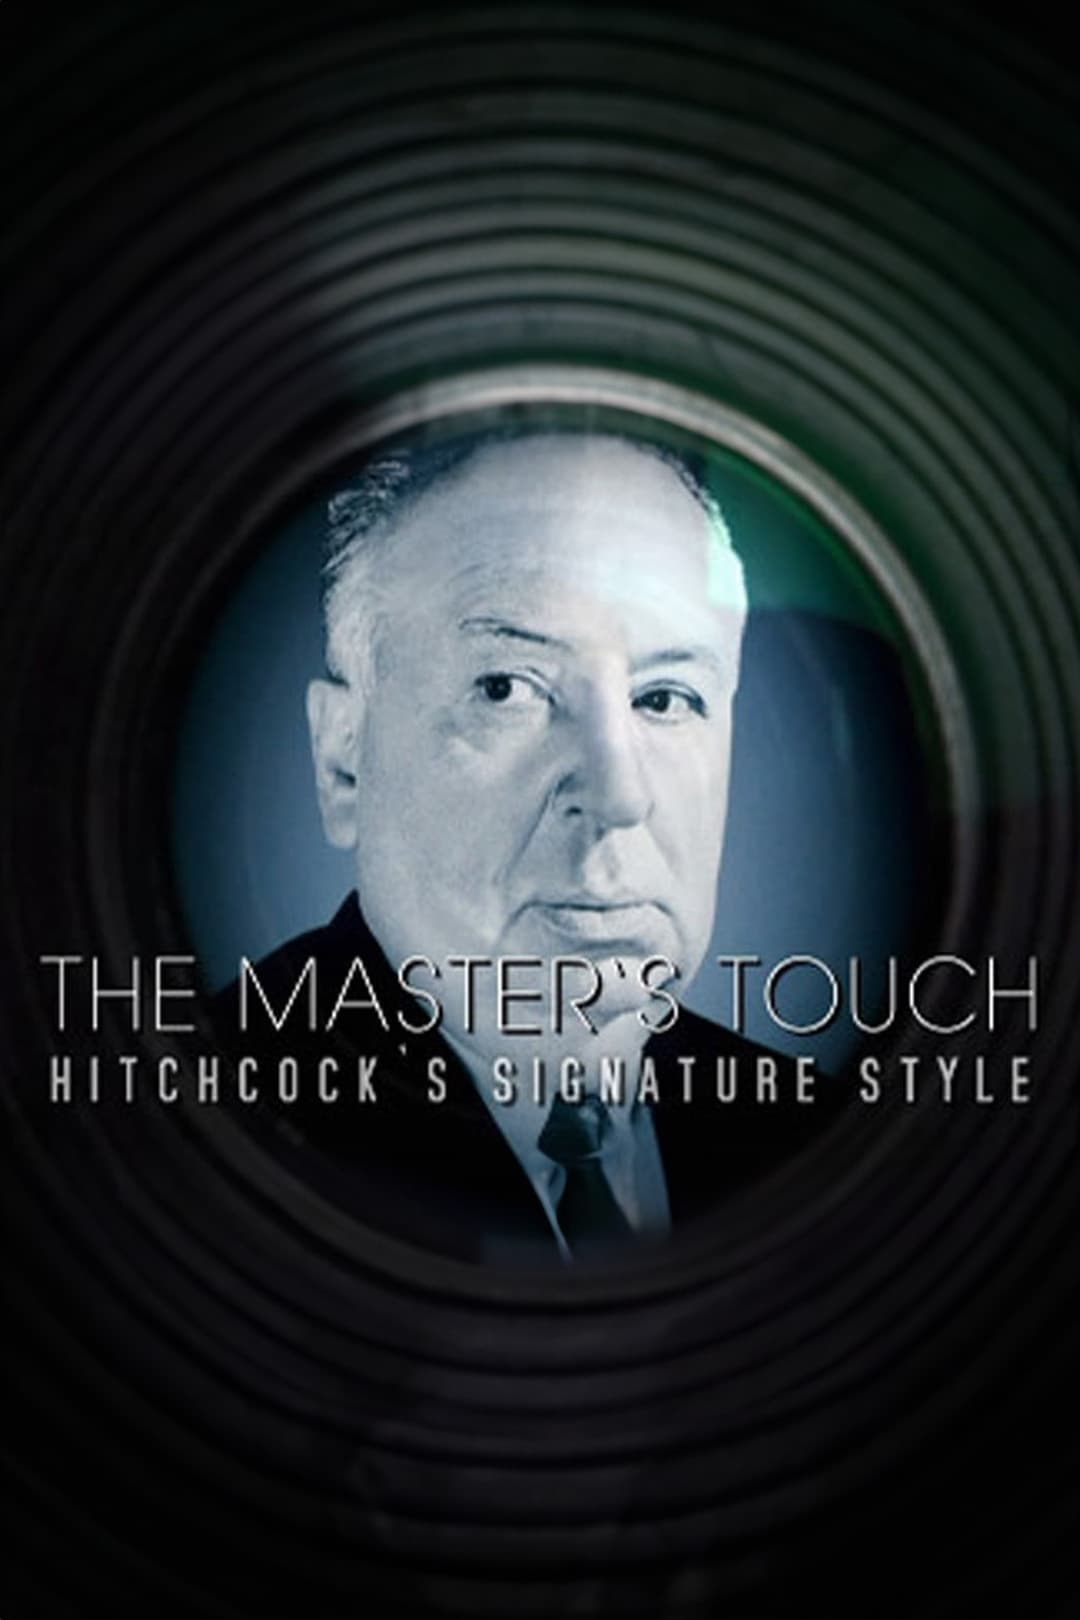 The Master's Touch: Hitchcock's Signature Style (2009)